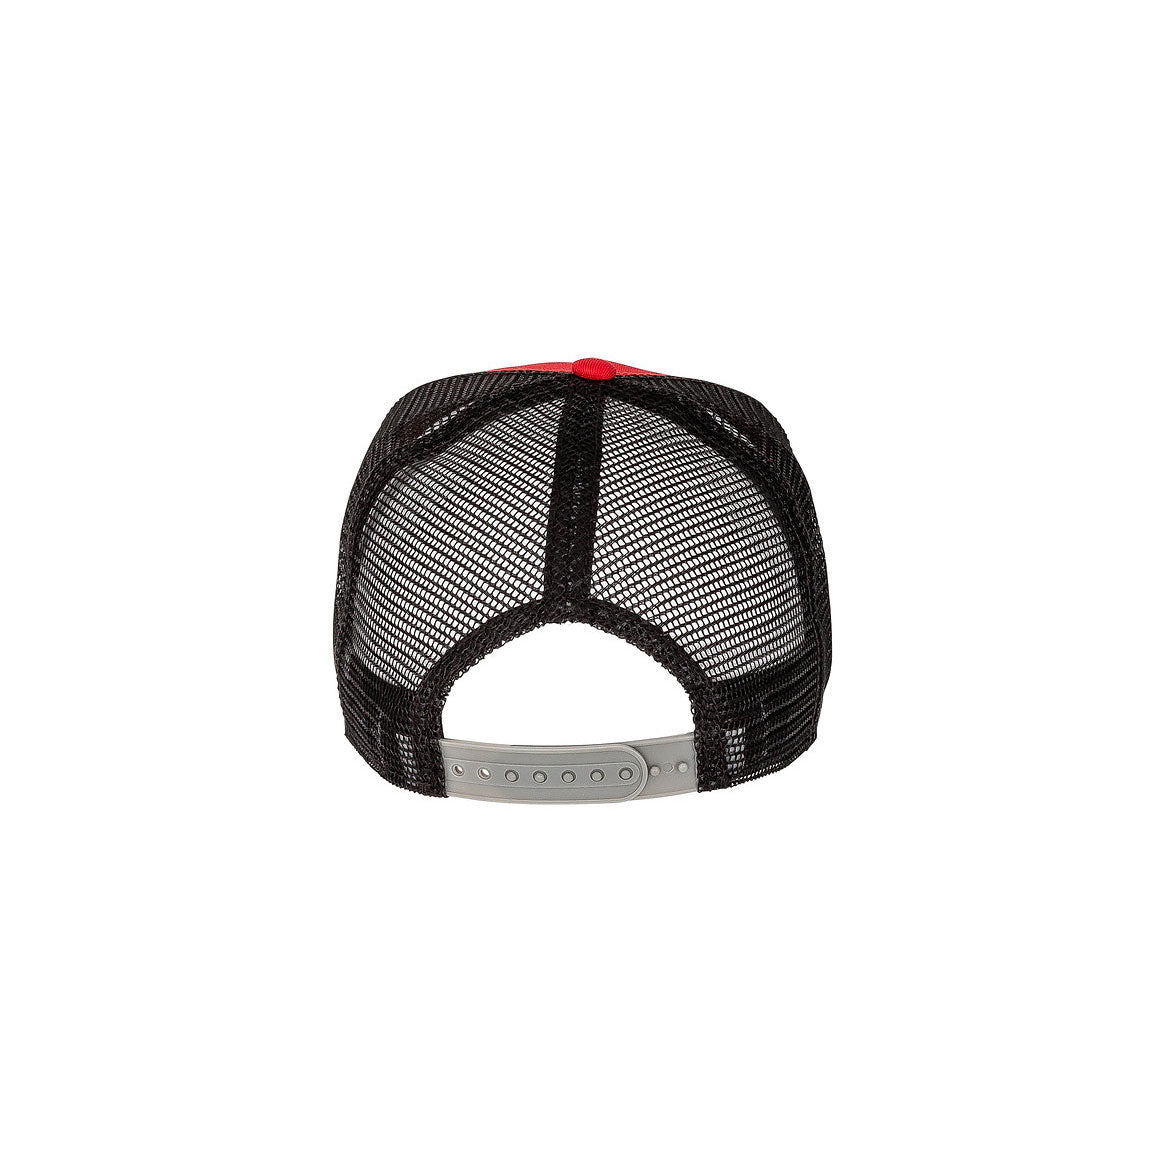 Basecap Grizzly Red/Black